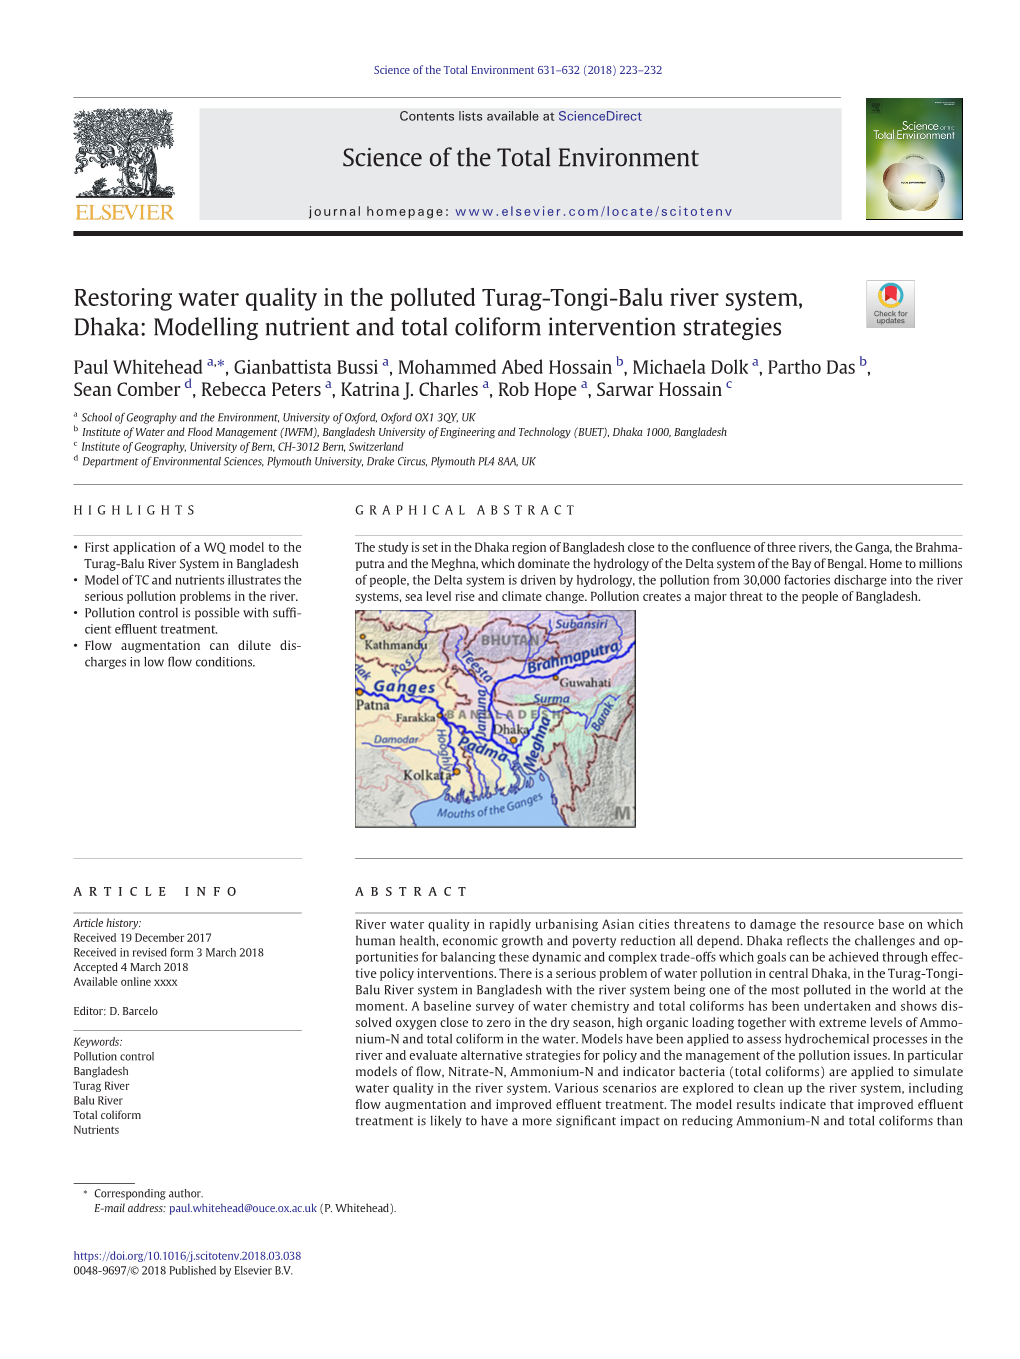 Restoring Water Quality in the Polluted Turag-Tongi-Balu River System, Dhaka: Modelling Nutrient and Total Coliform Intervention Strategies